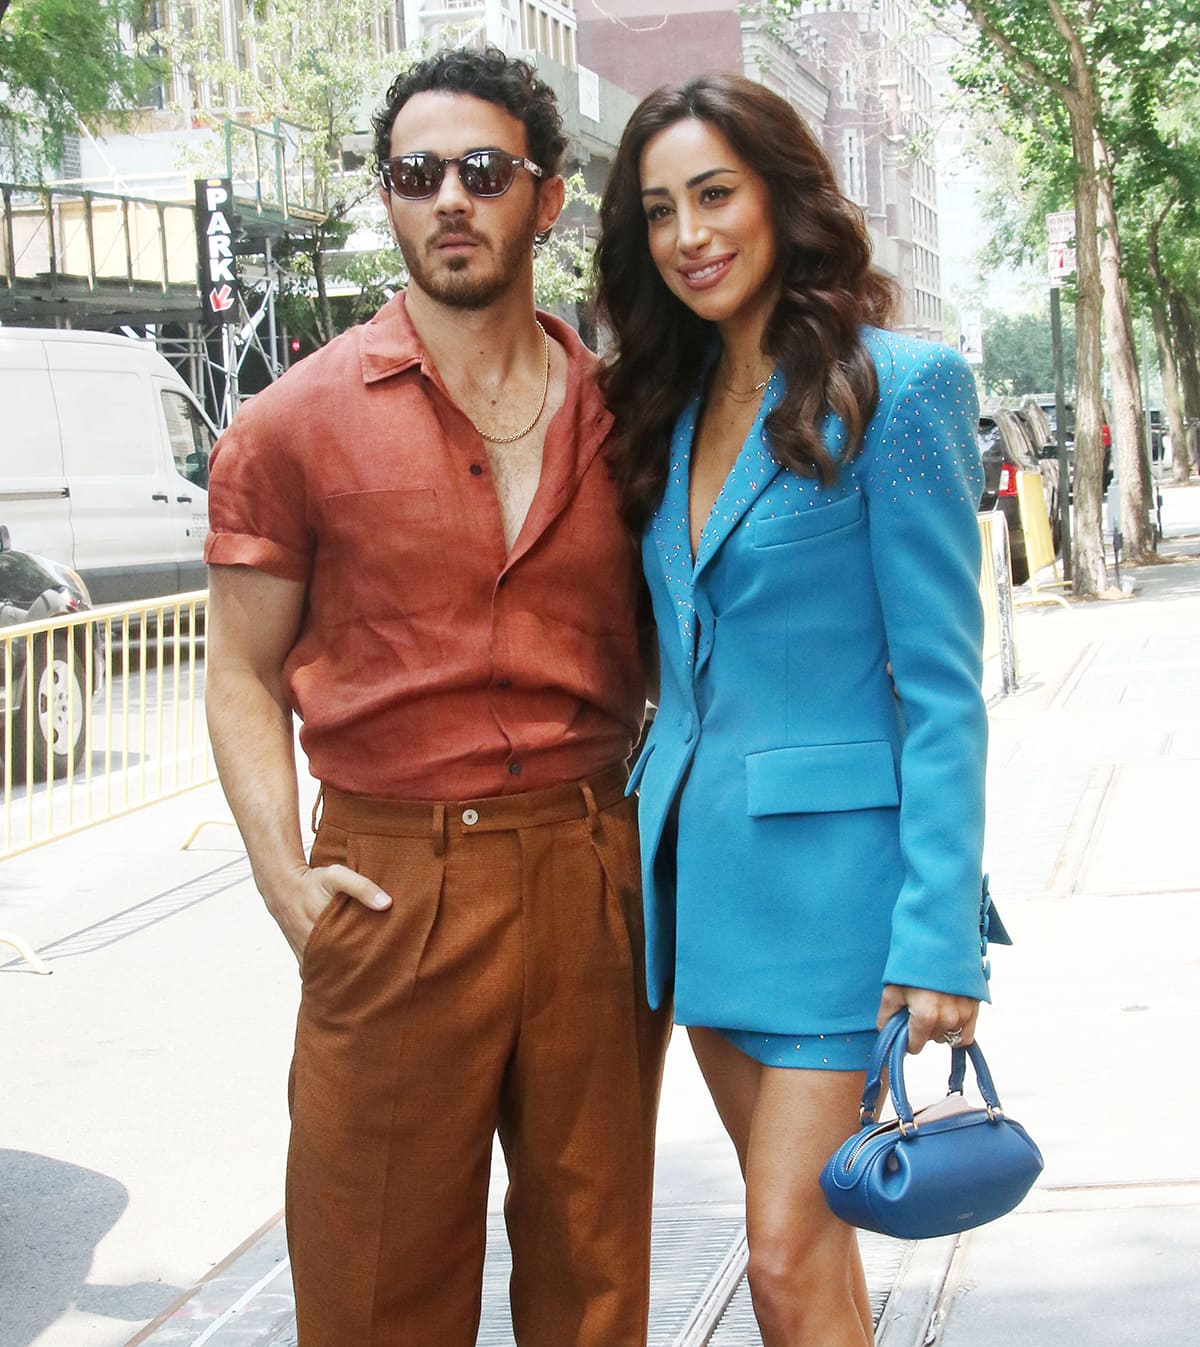 Danielle Jonas carries a blue Yuzefi mini bag and finishes off her outfit with Miu Miu heels